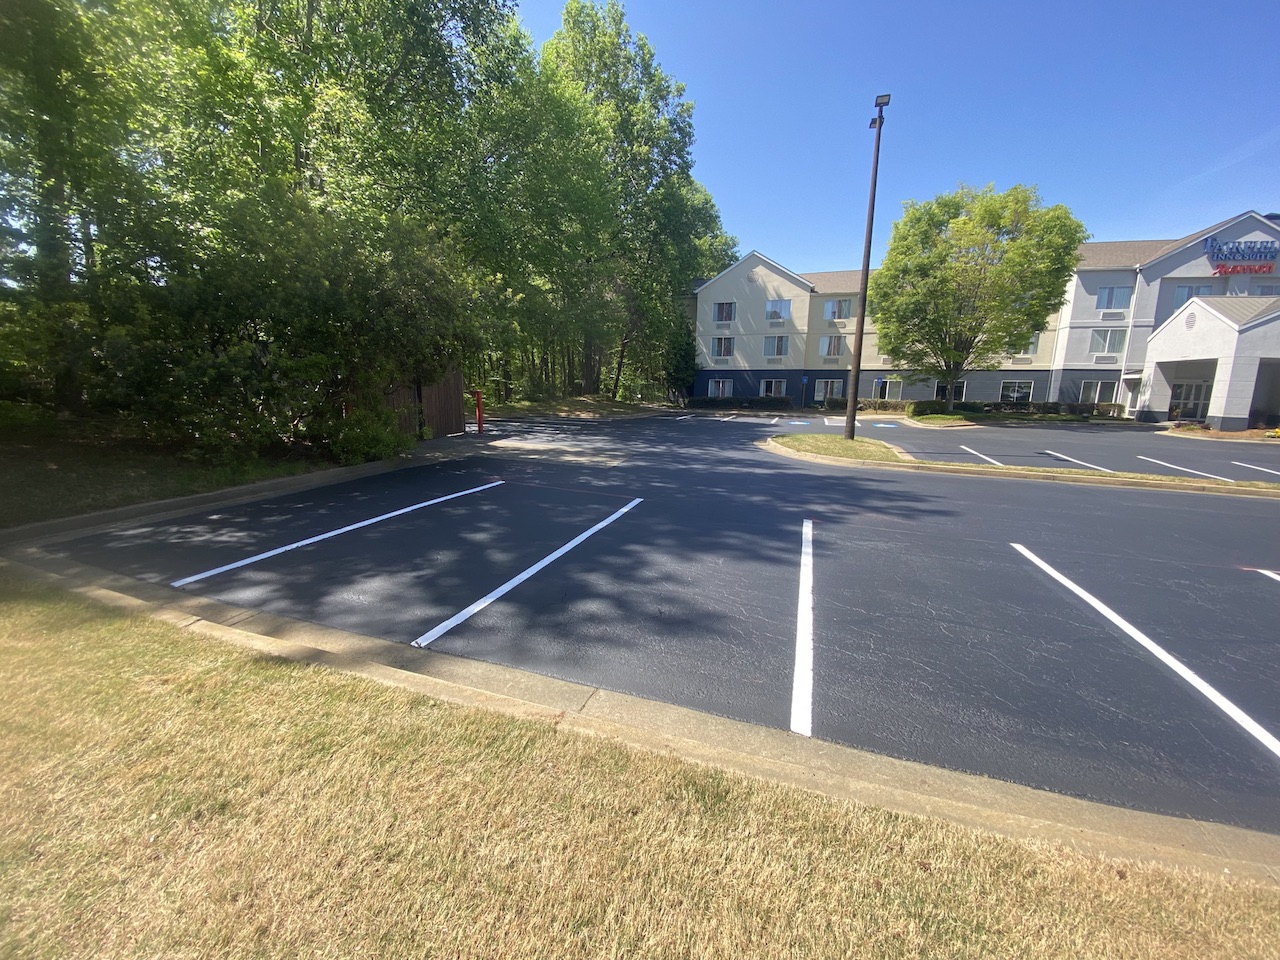 What To Look For In A Marietta Asphalt Sealcoating Contractor